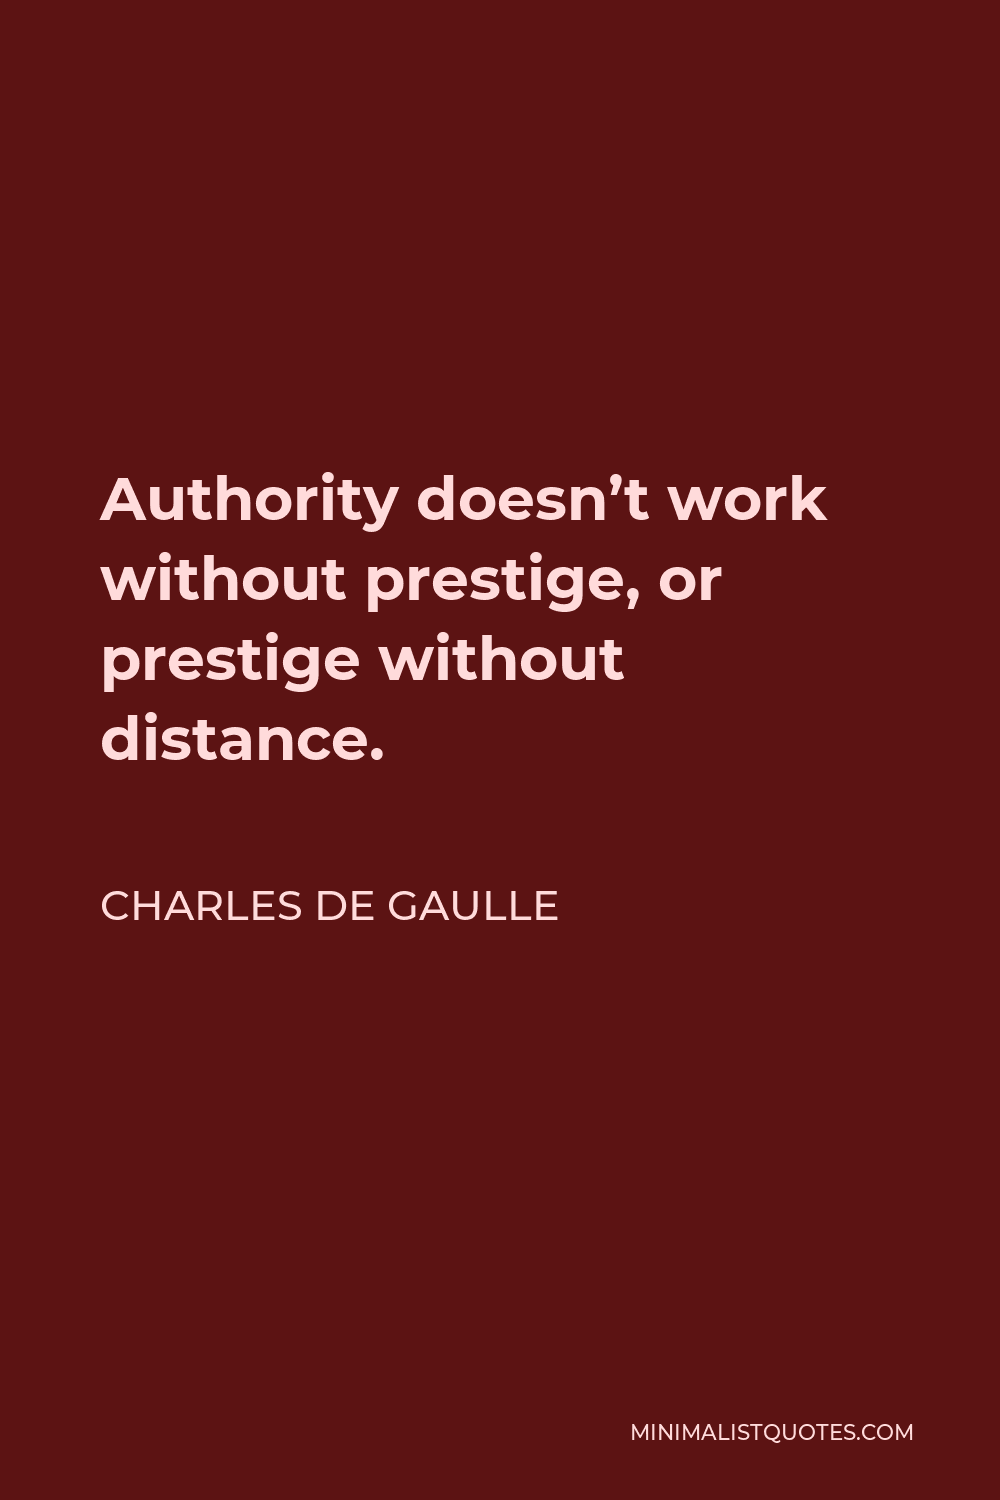 Charles de Gaulle Quote - Authority doesn’t work without prestige, or prestige without distance.